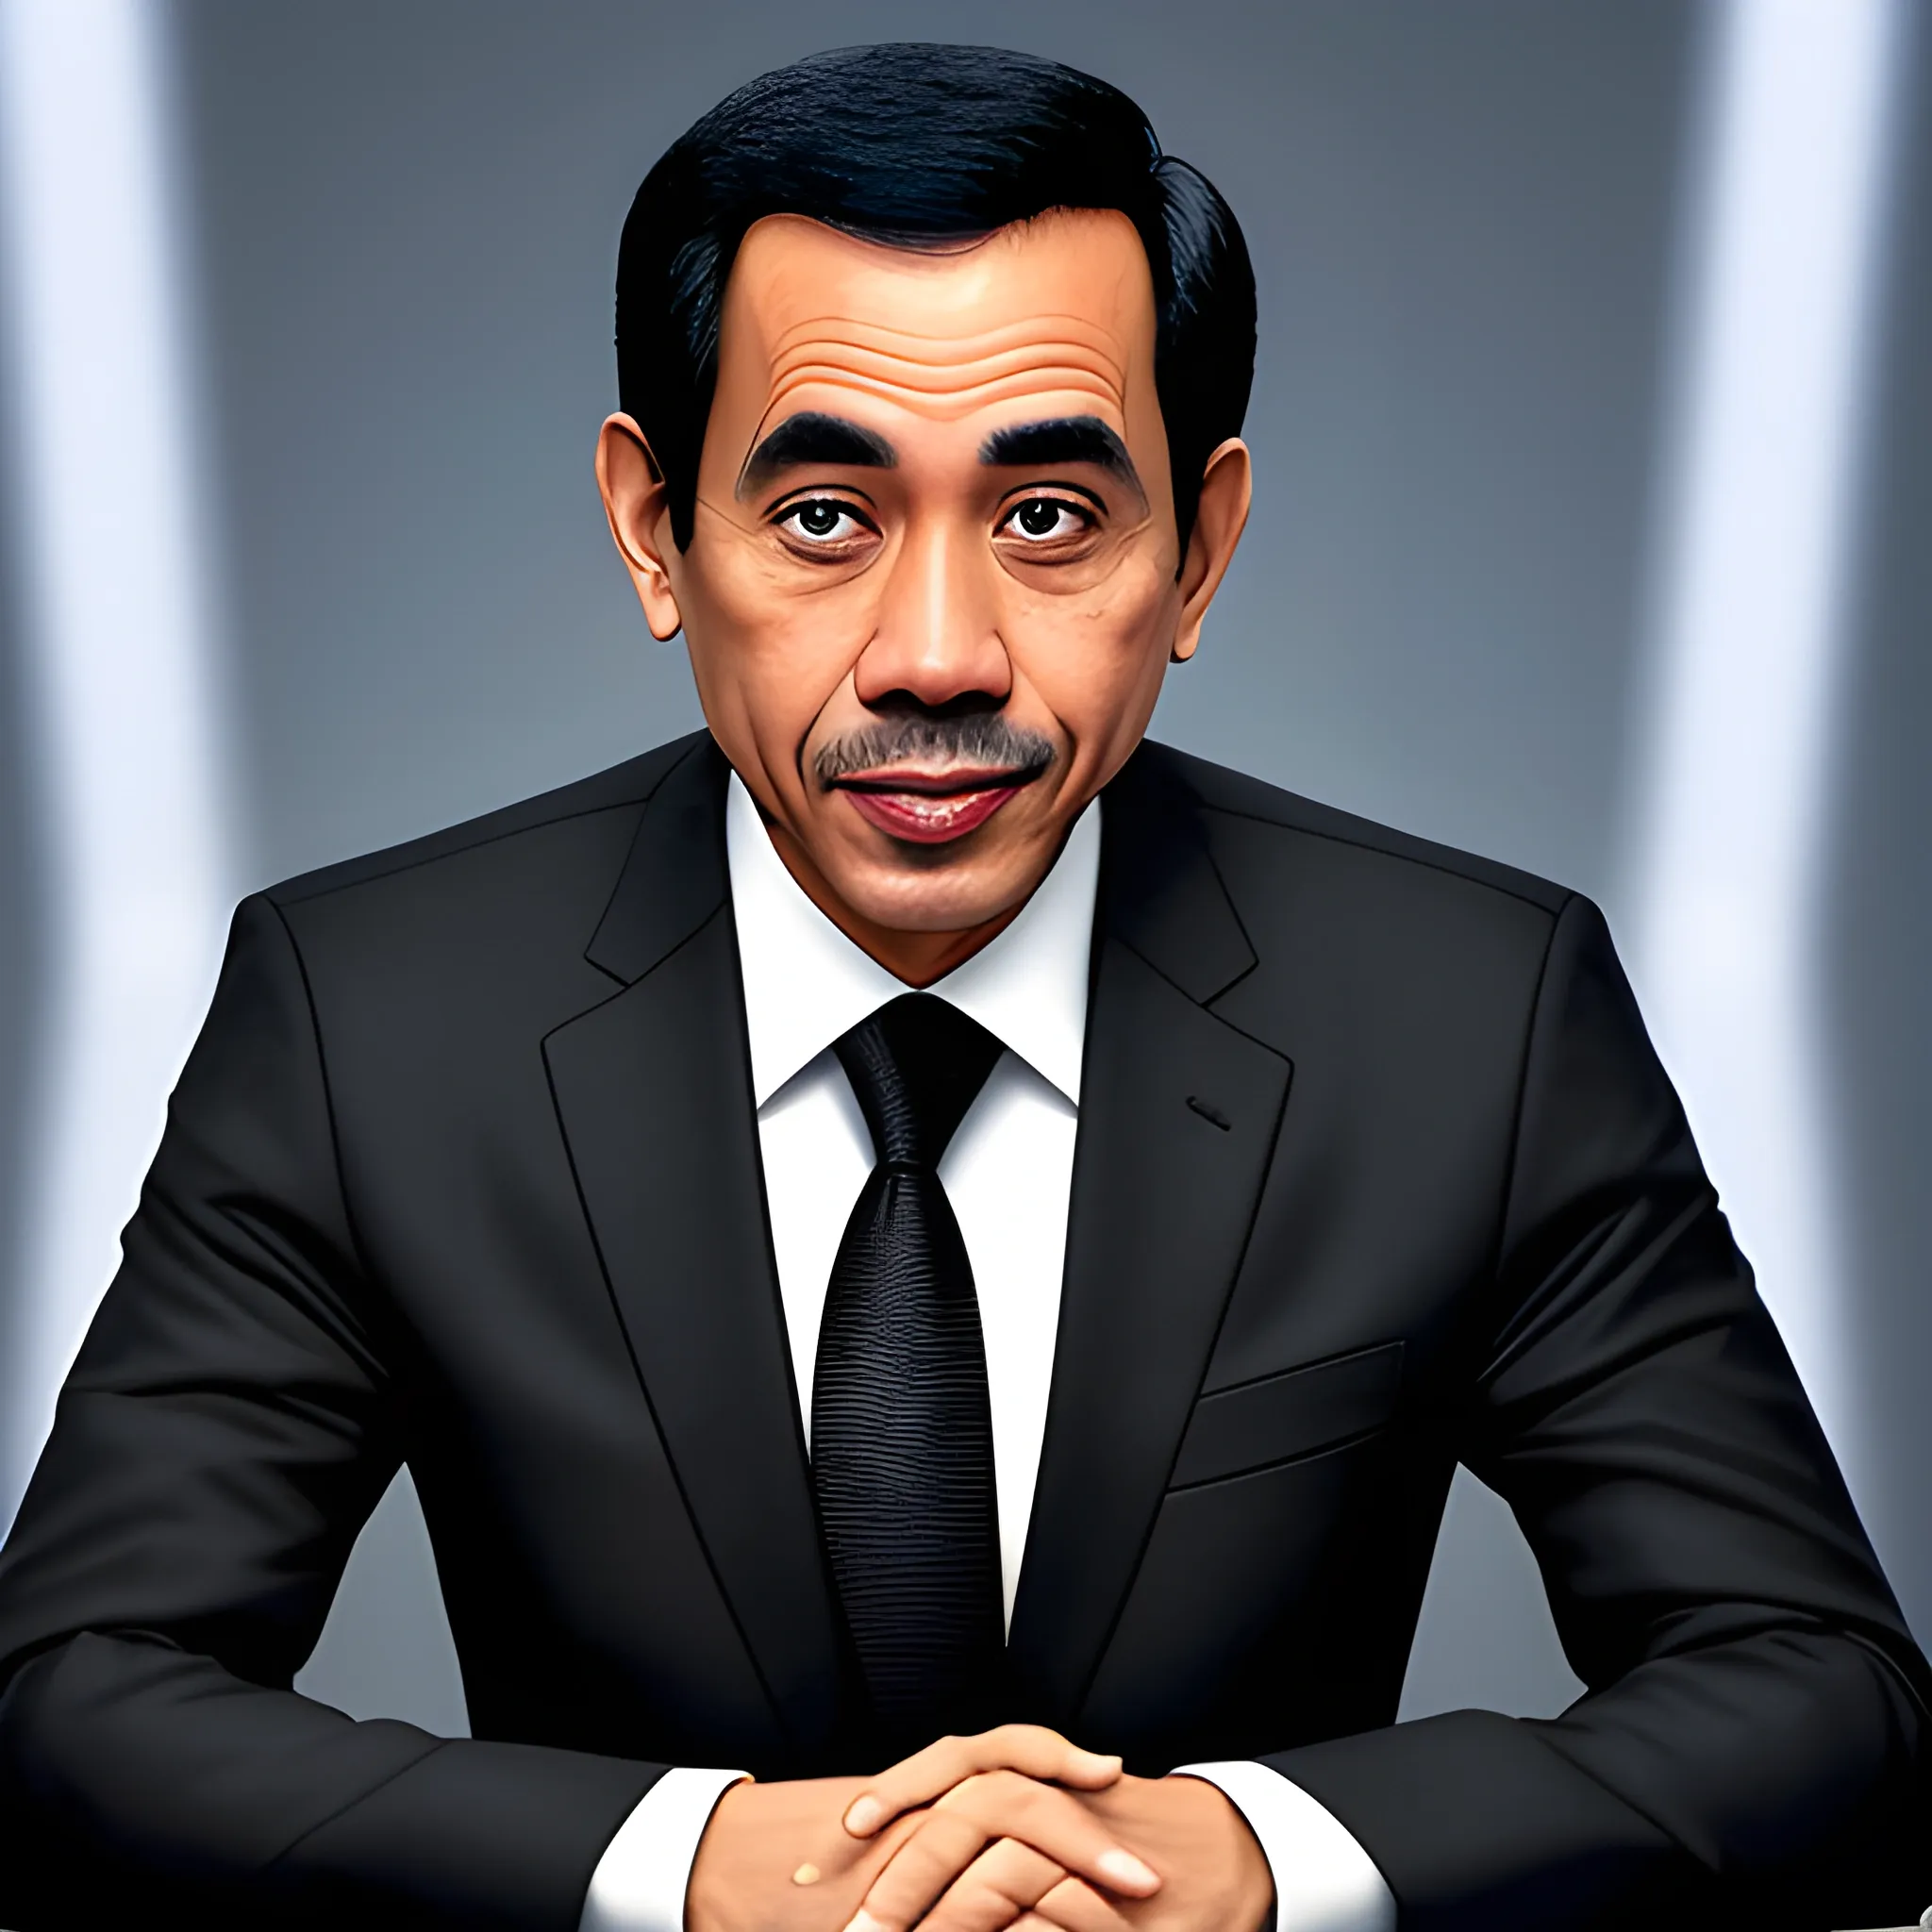 "A young boy with the face of Jokowi, wearing a black suit, a white tie, and black shoes, looking at the camera, in Pixar style -- AR 9:16"